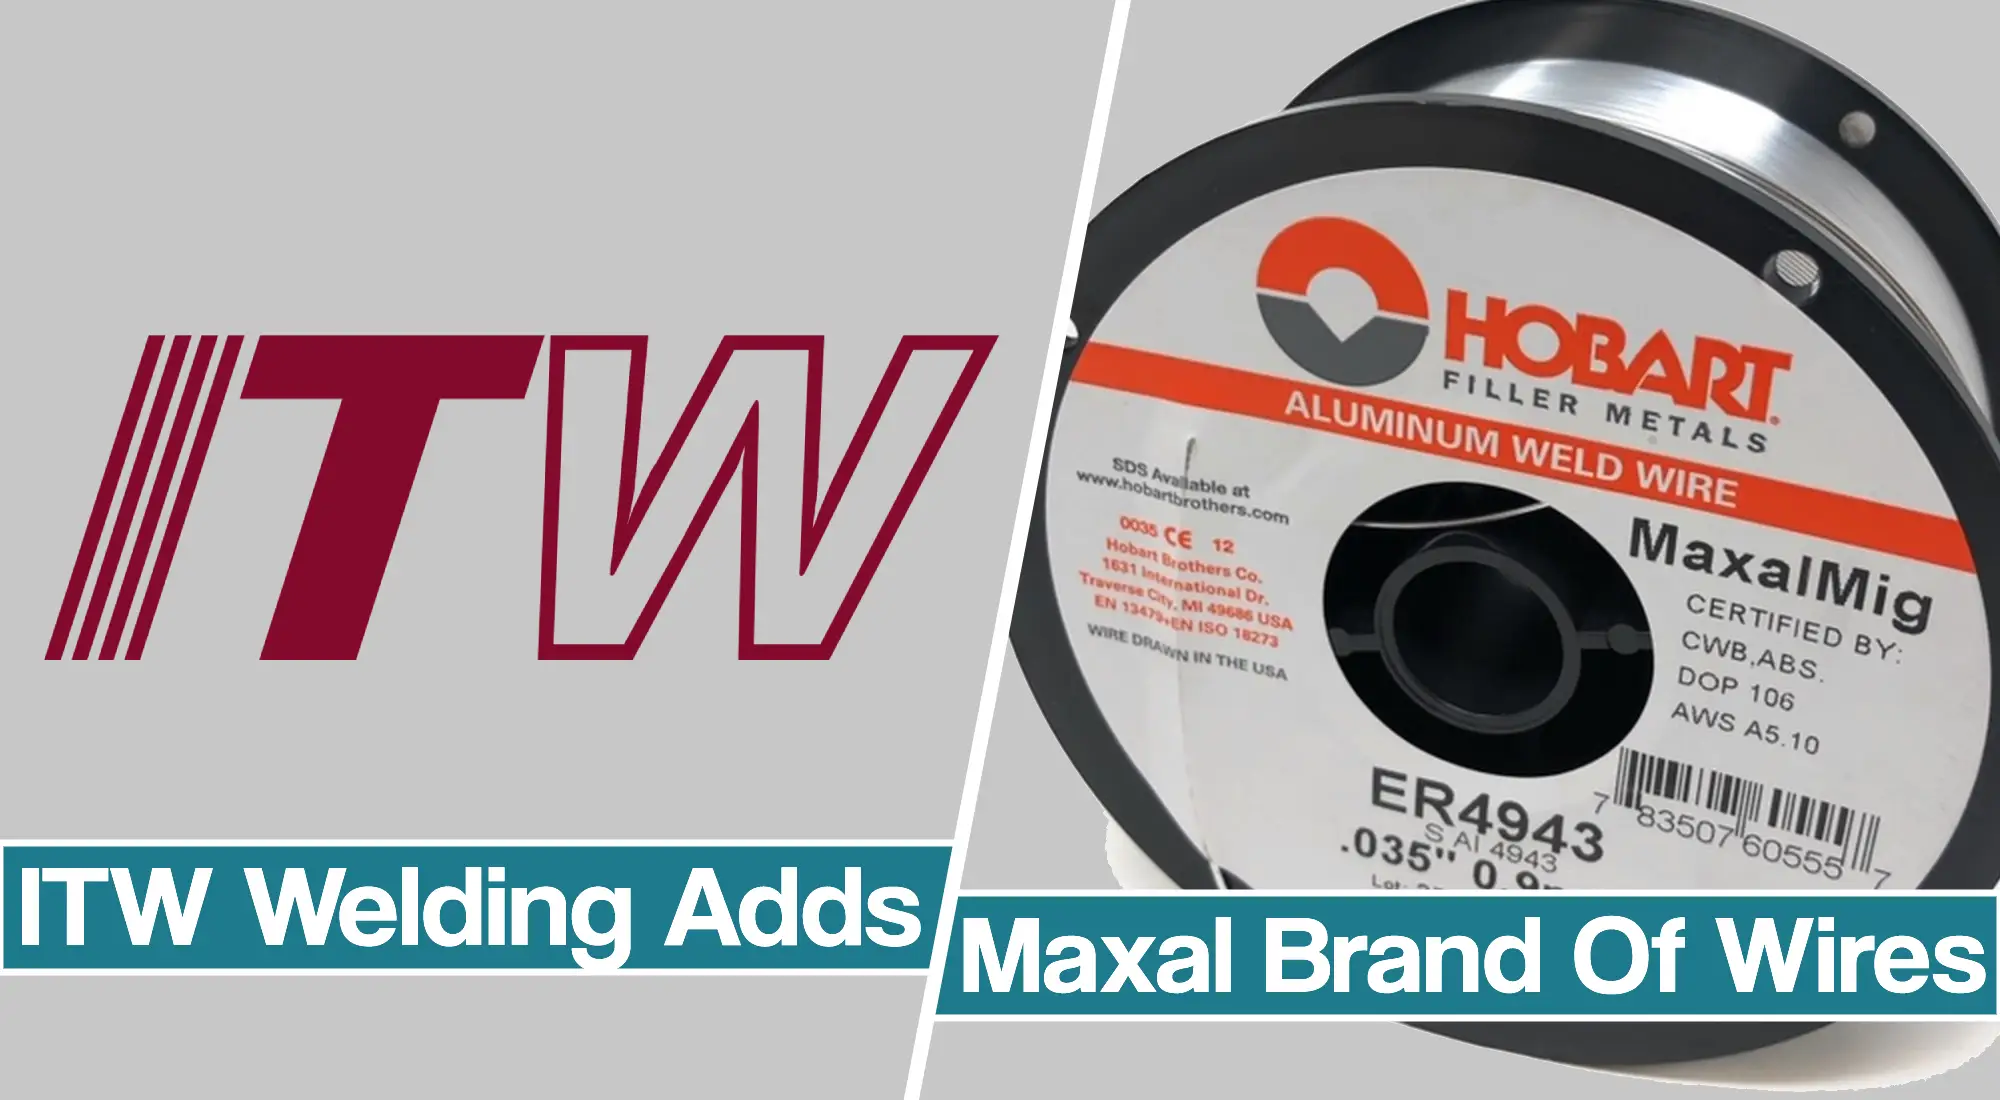 ITW North America Adds Maxal Welding wires